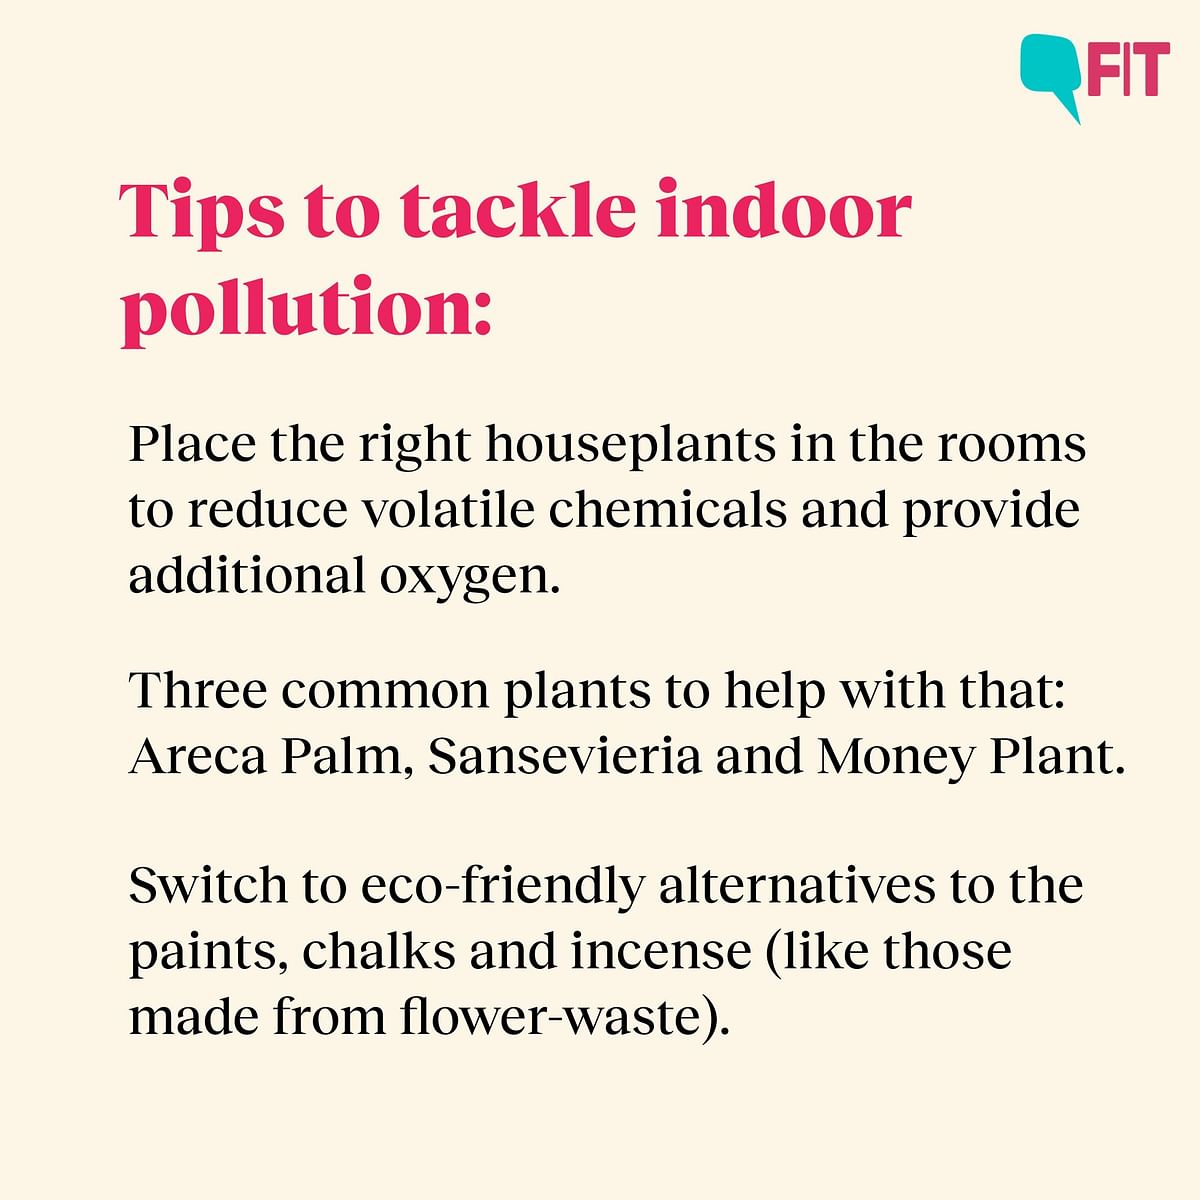 How Do You Tackle Indoor Air Pollution While Working From Home?